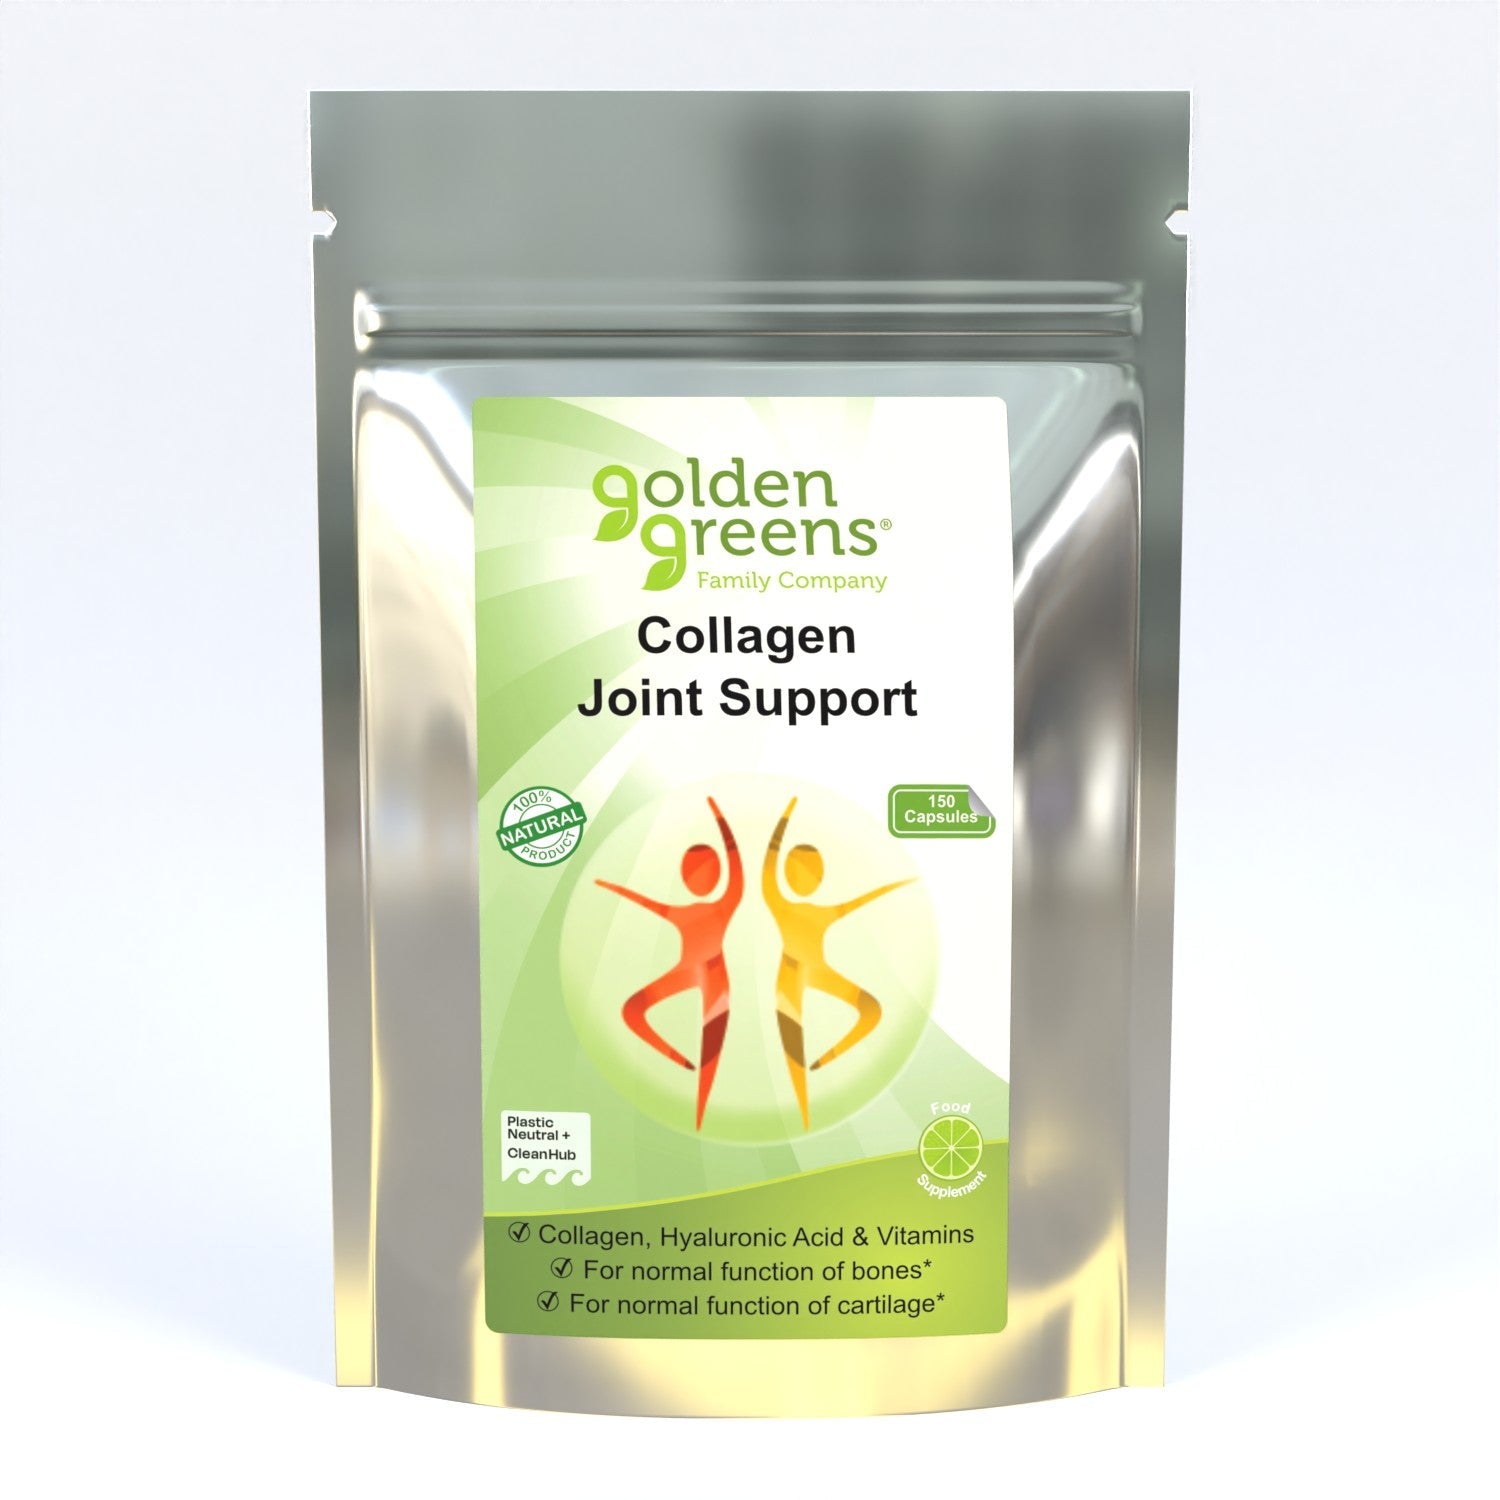 View Collagen Joint Support Capsules High Strength information